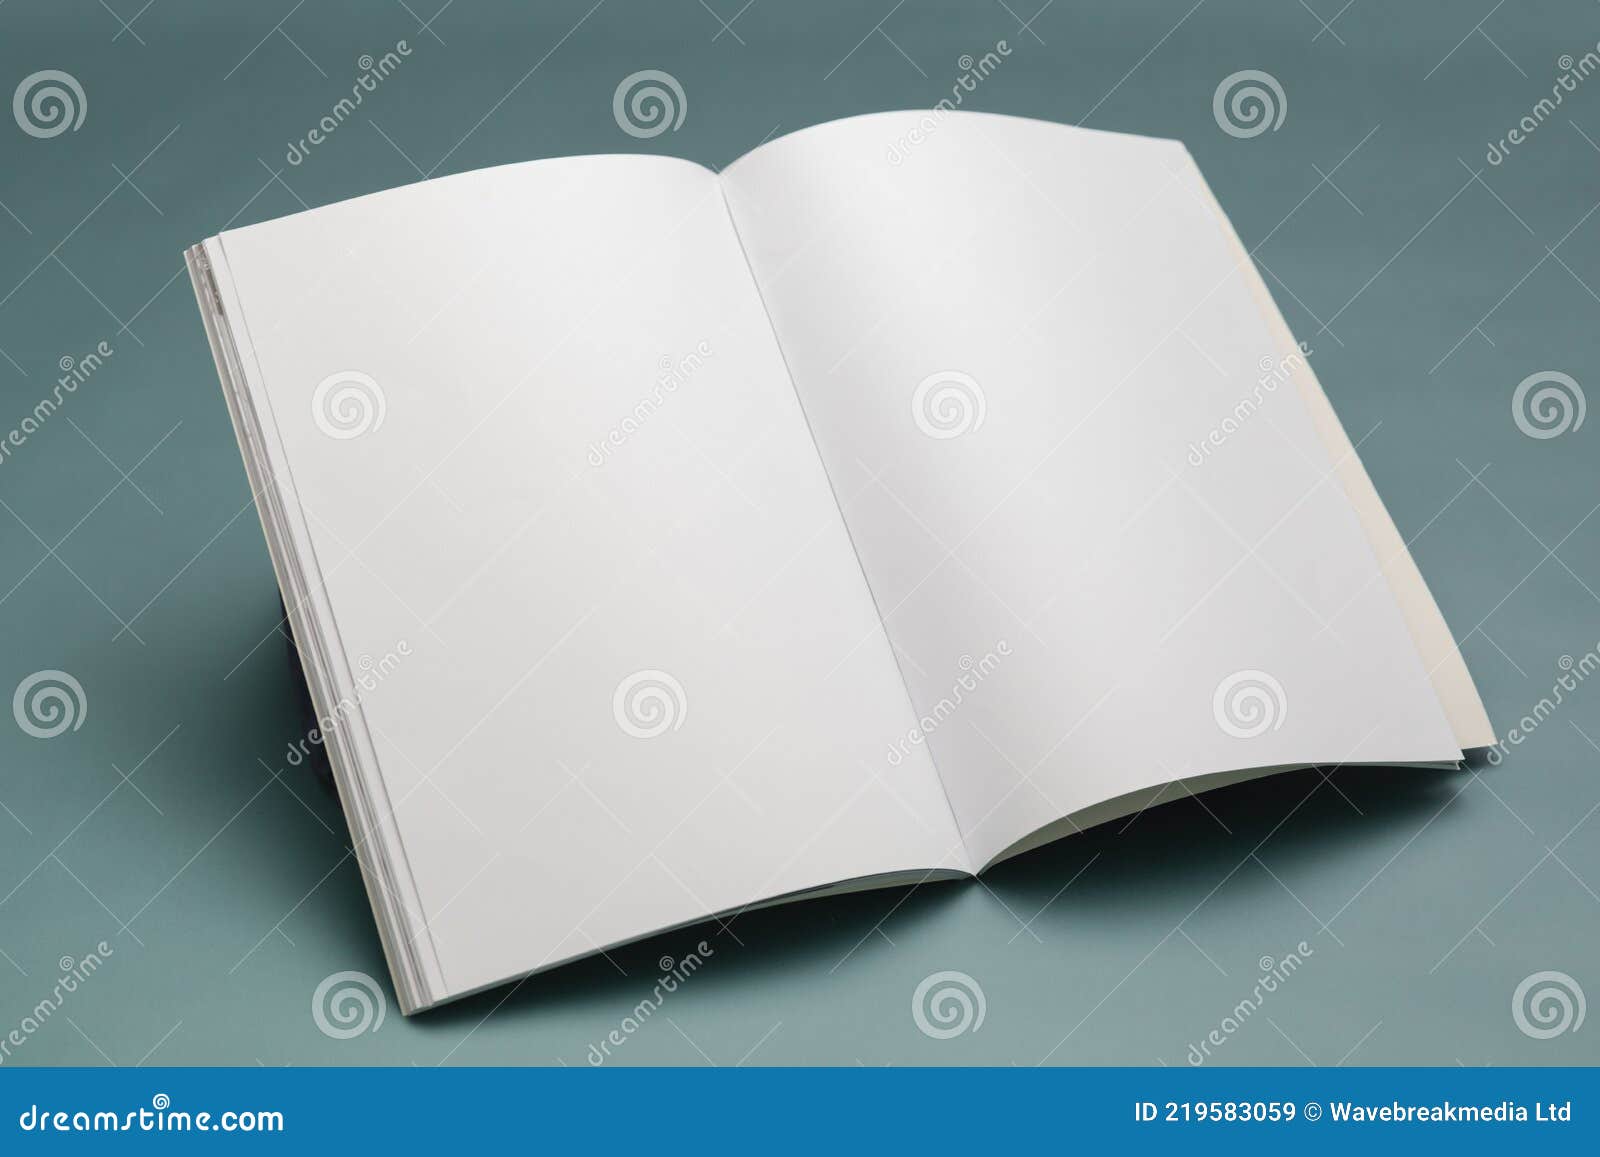 Composition Of Opened Book With Blank Pages On Blue Background Stock Image  - Image Of Note, Space: 219583059